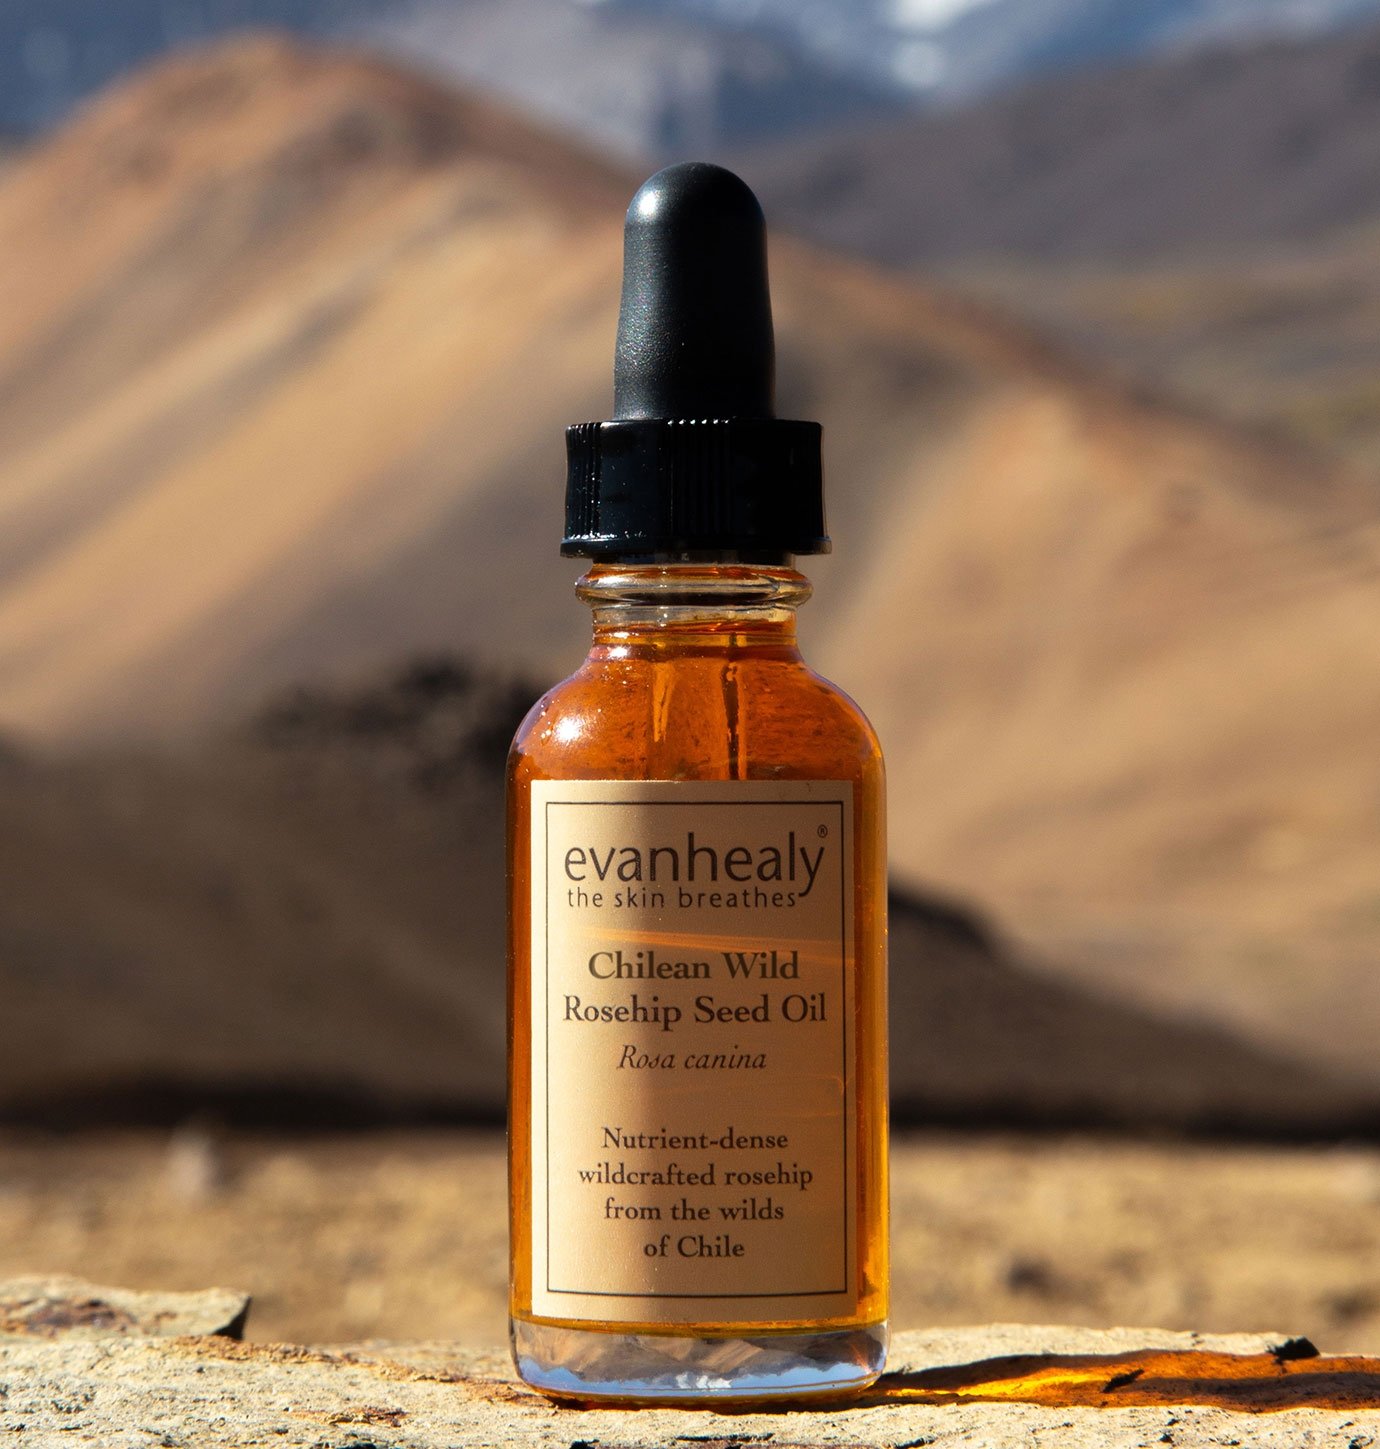 chilean wild rosehip seed oil evanhealy product in chile